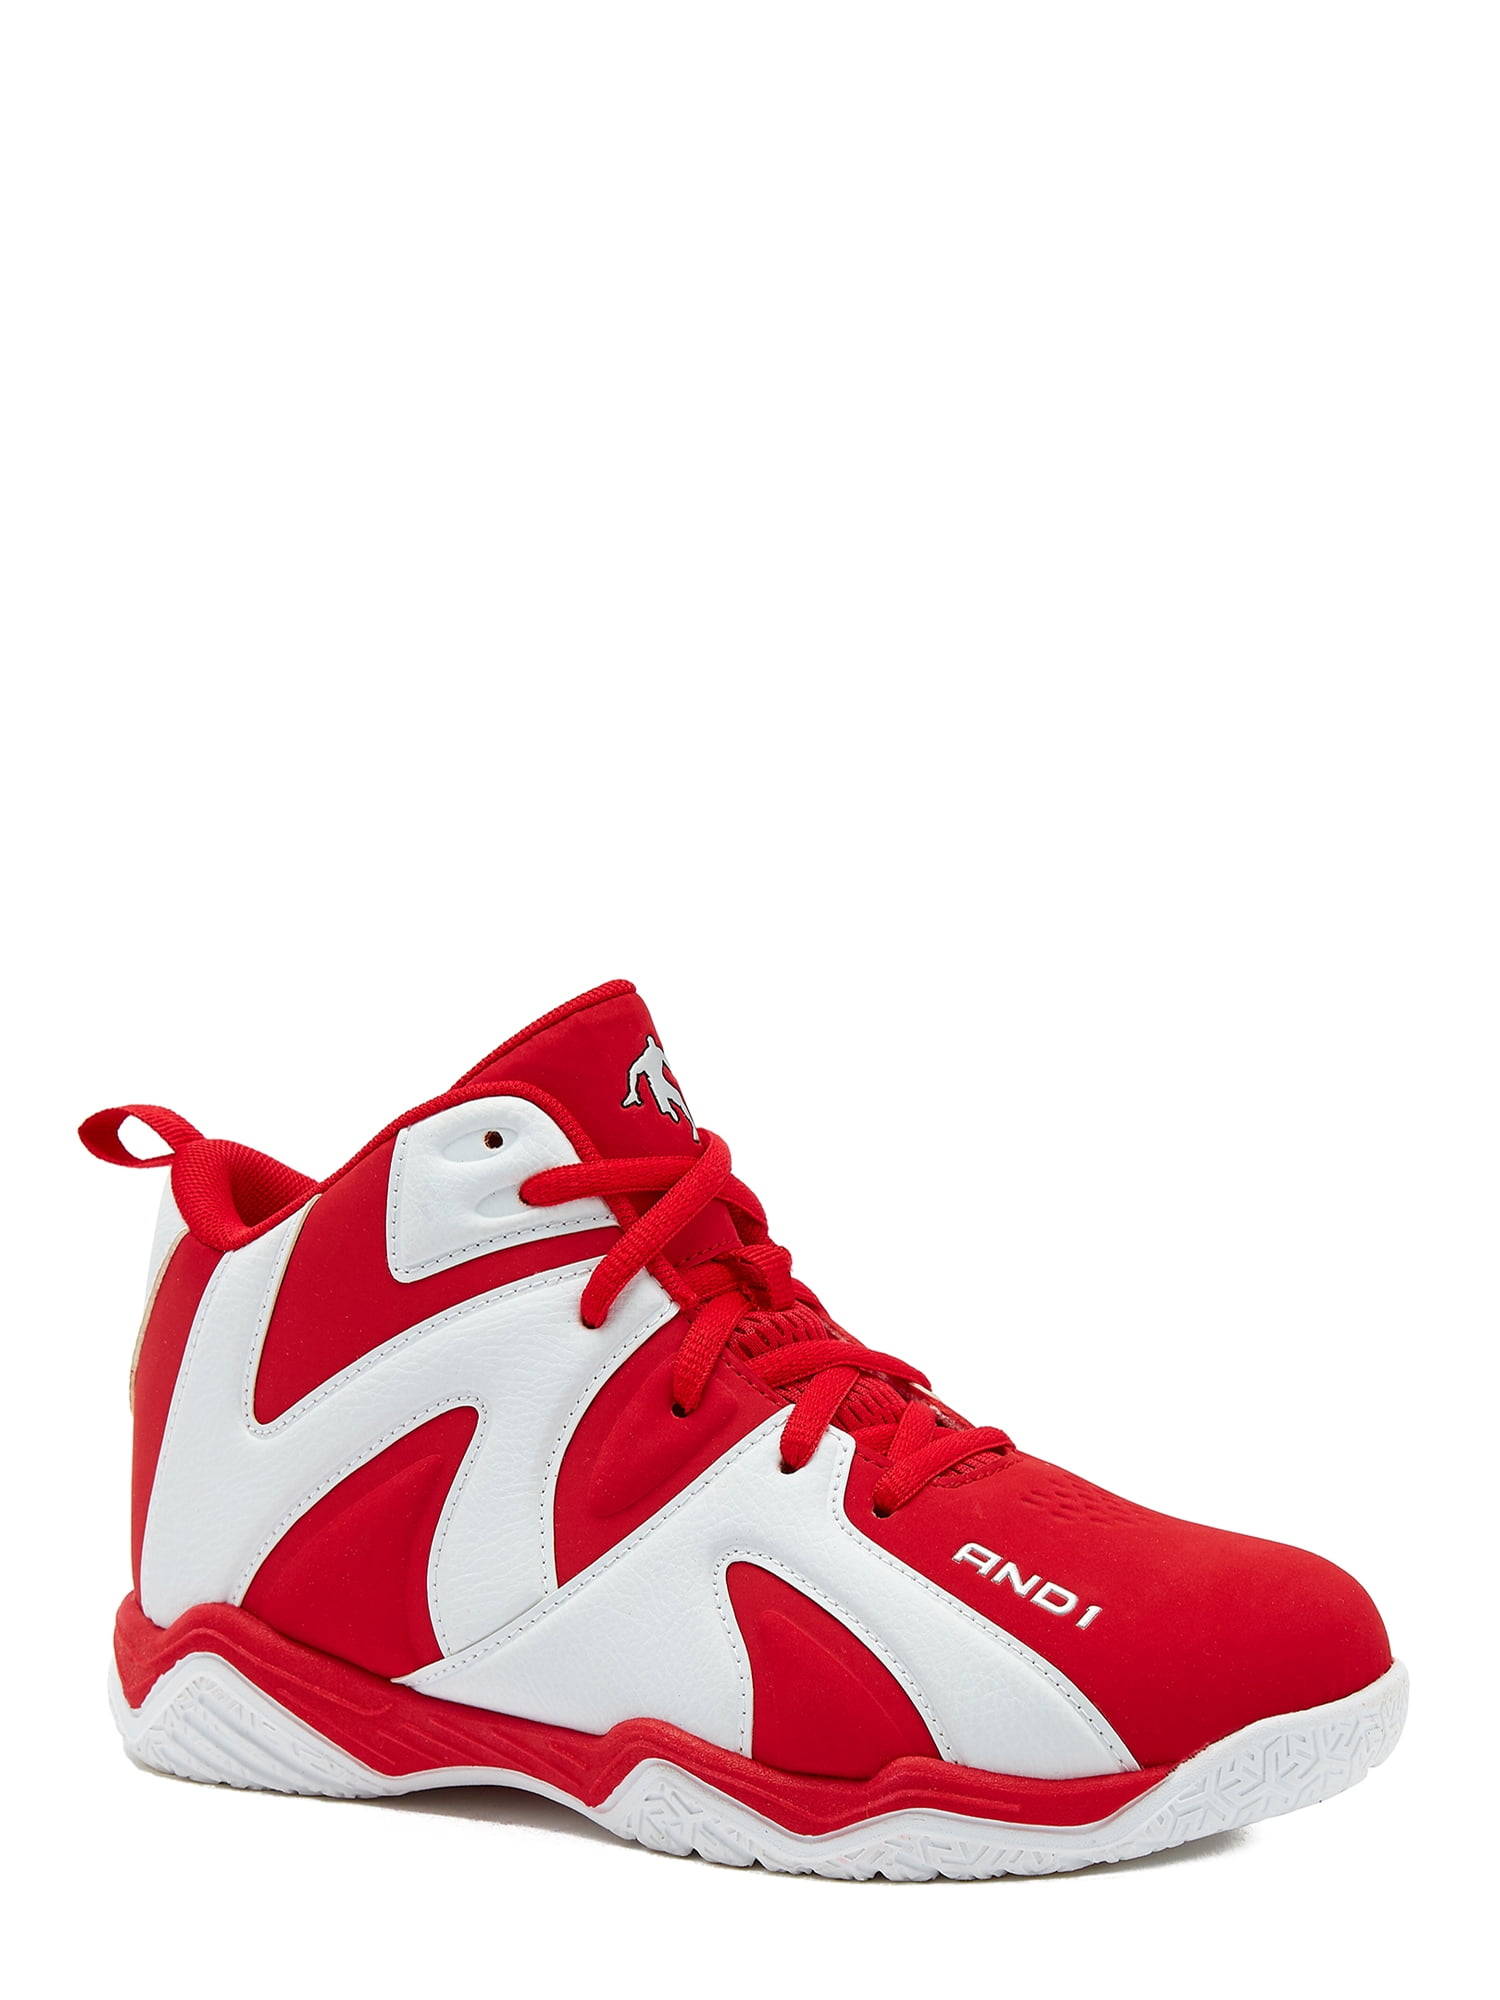 AND1 & Big Boys Assist 3.0 High-Top Sneakers, Sizes 12-6 - Walmart.com